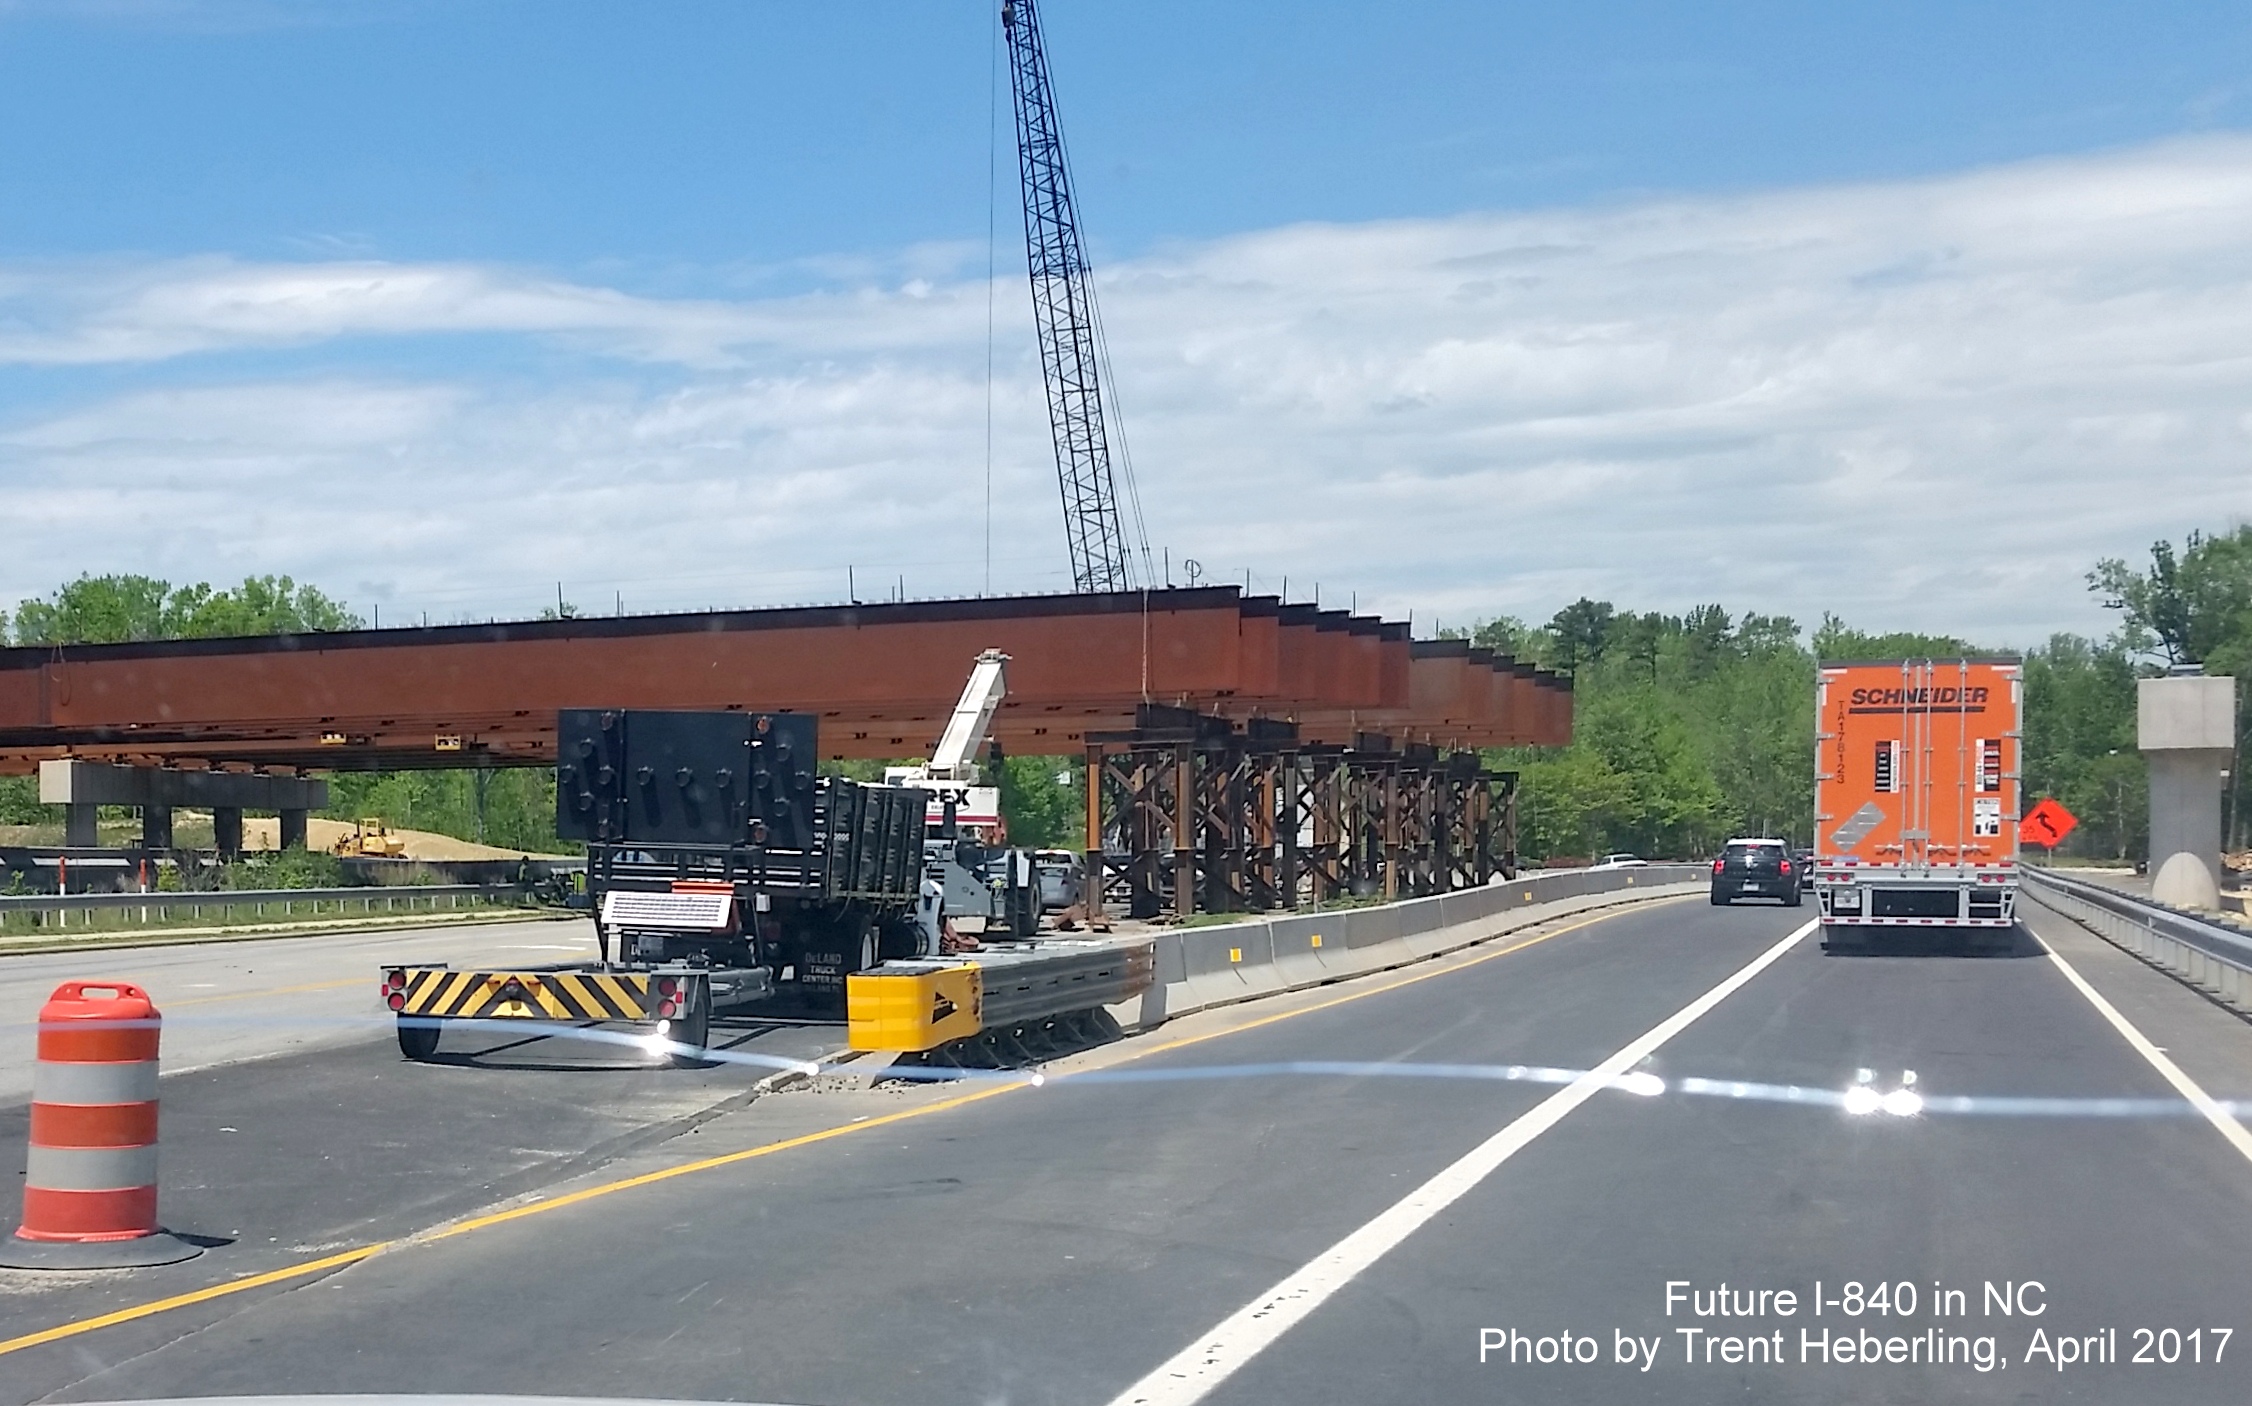 Image taken from US 220 North of future I-840 bridge being built for Greensboro Loop interchange, by Trent Heberling